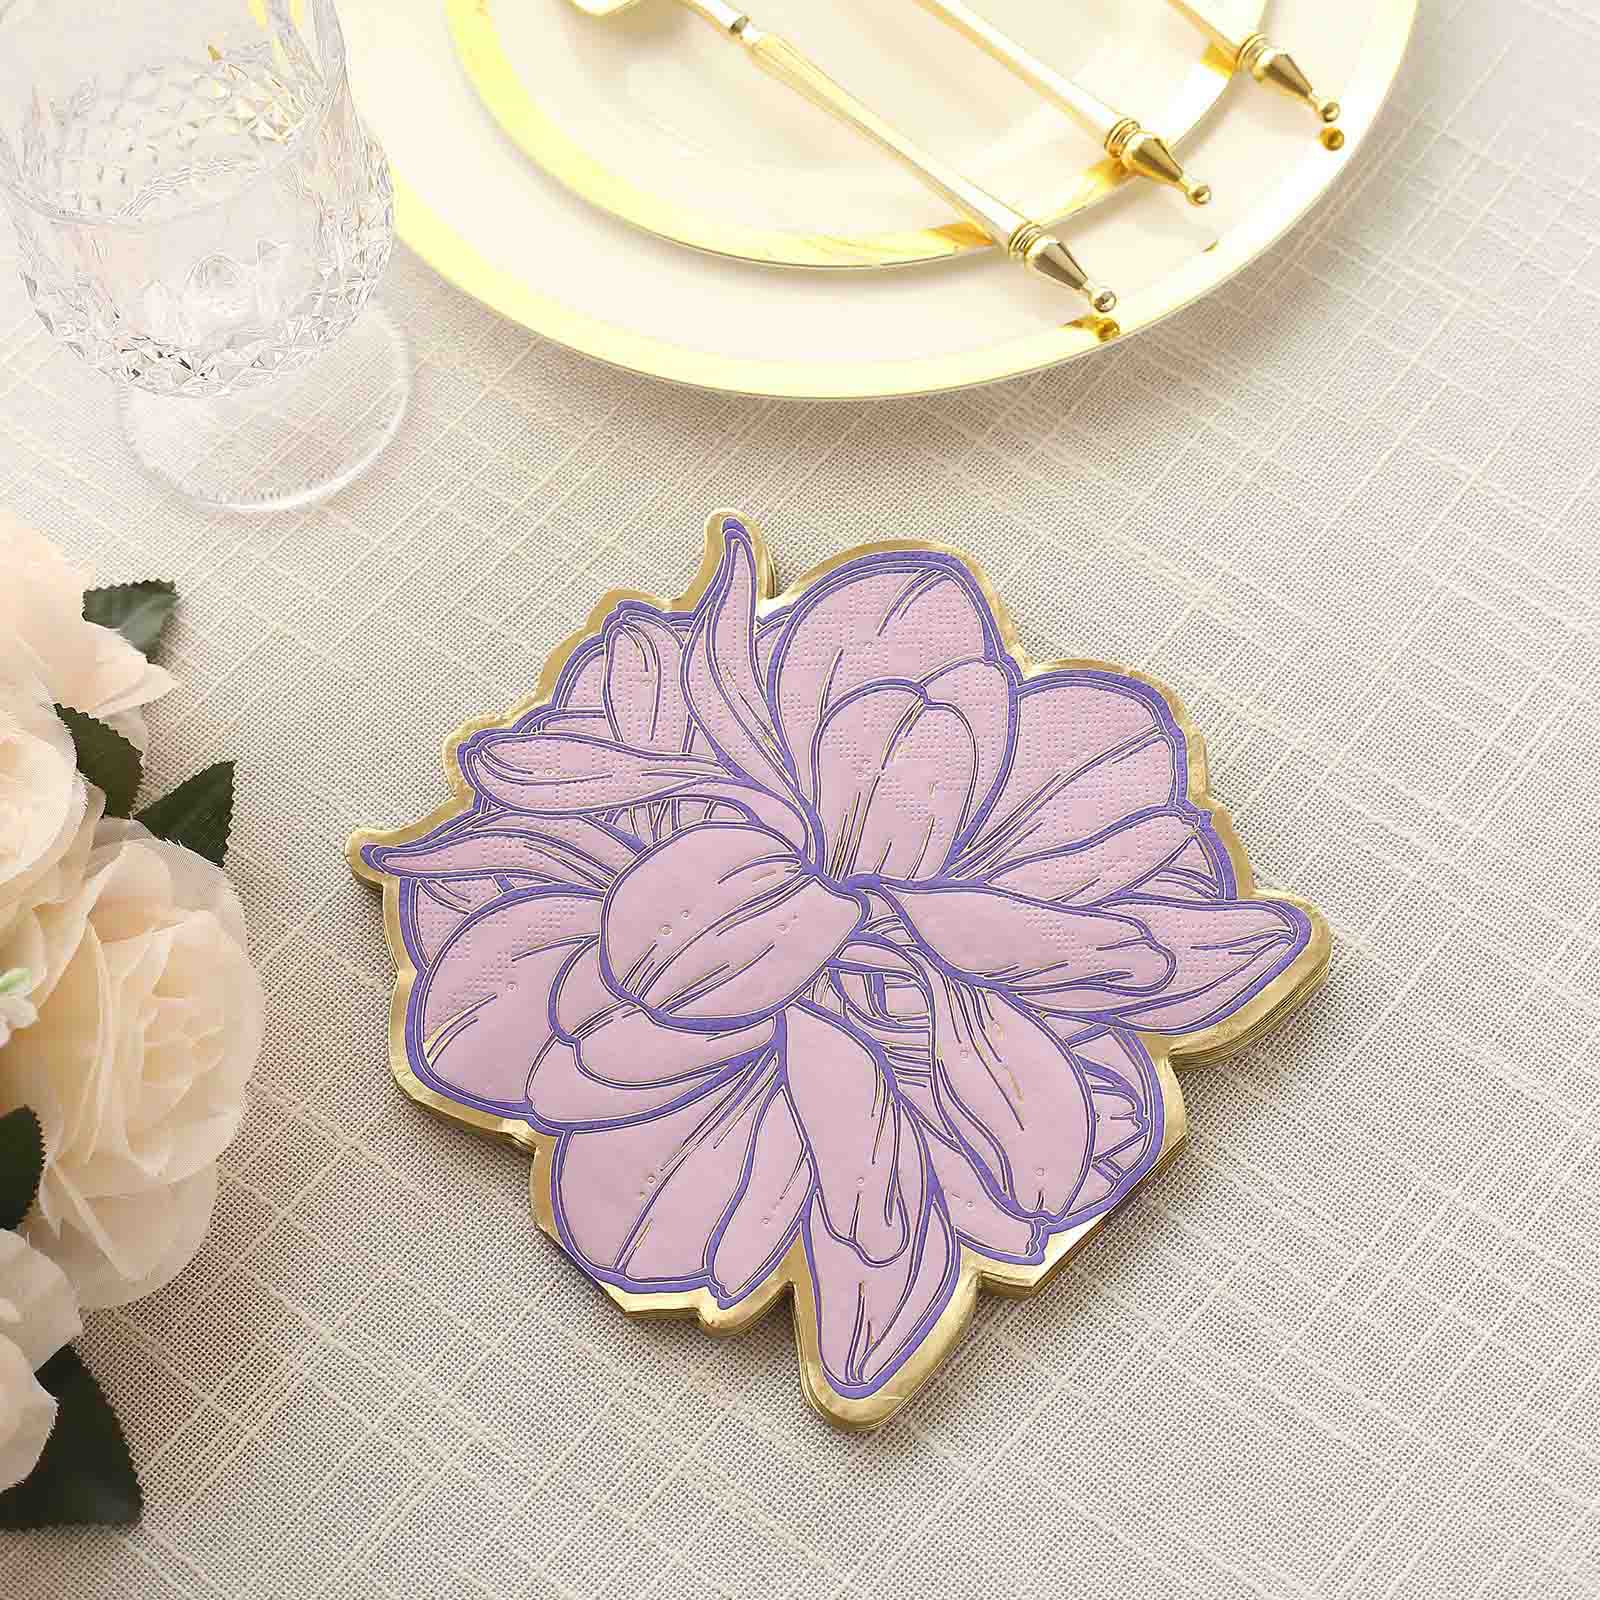 20 Peony Flower Shaped Paper Beverage Napkins with Edges - Purple and Gold NAP_BEV04_PEO